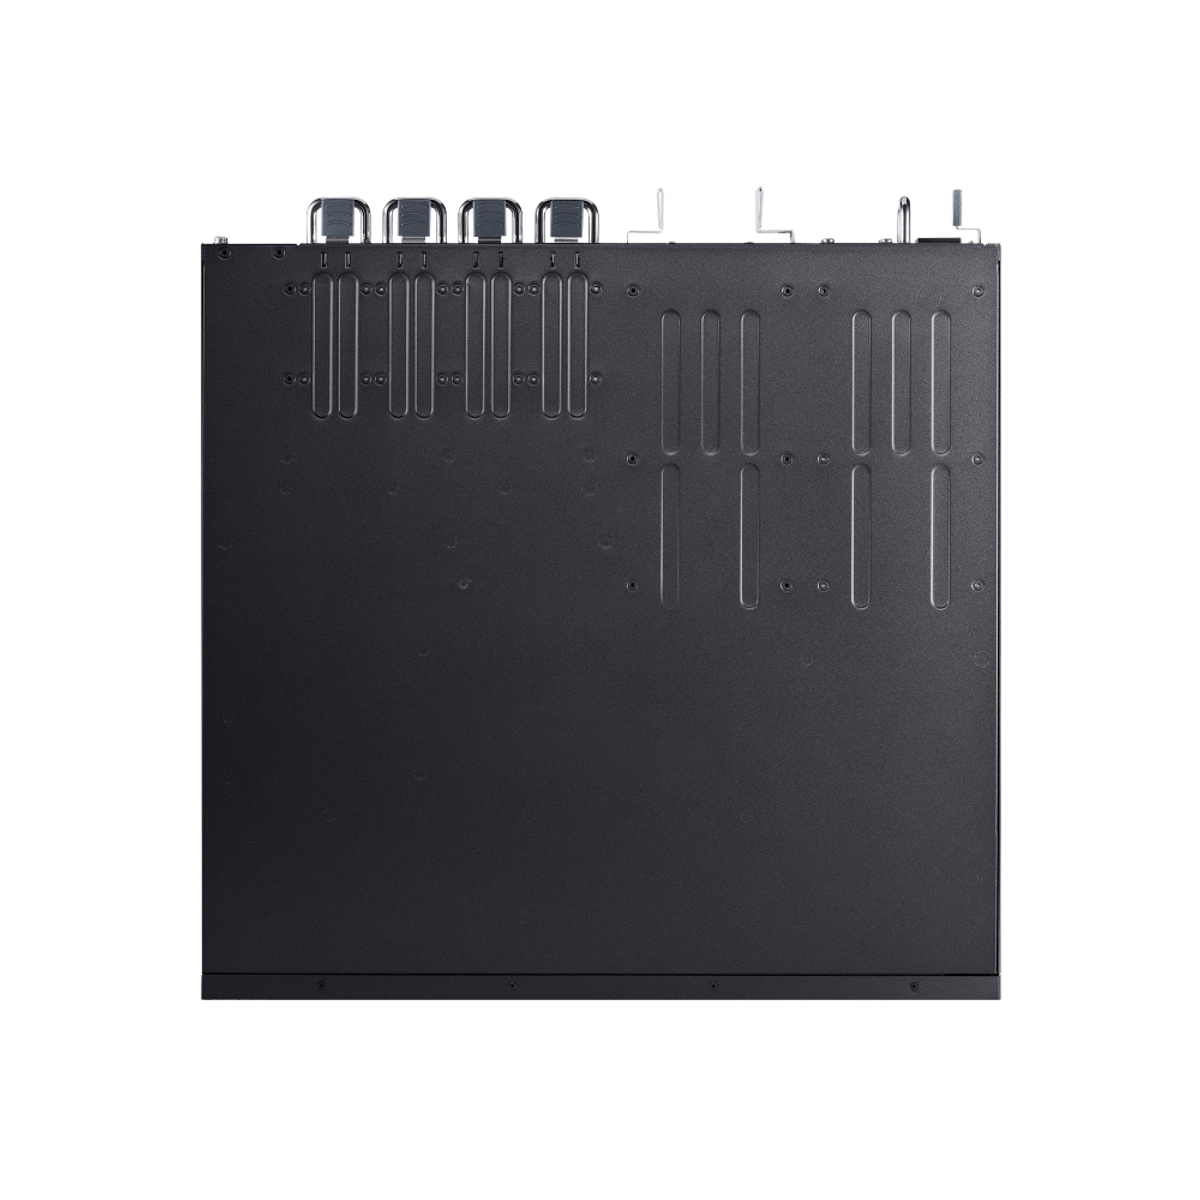 48-P L3 Managed PoE+ Switch 6 10G Slots